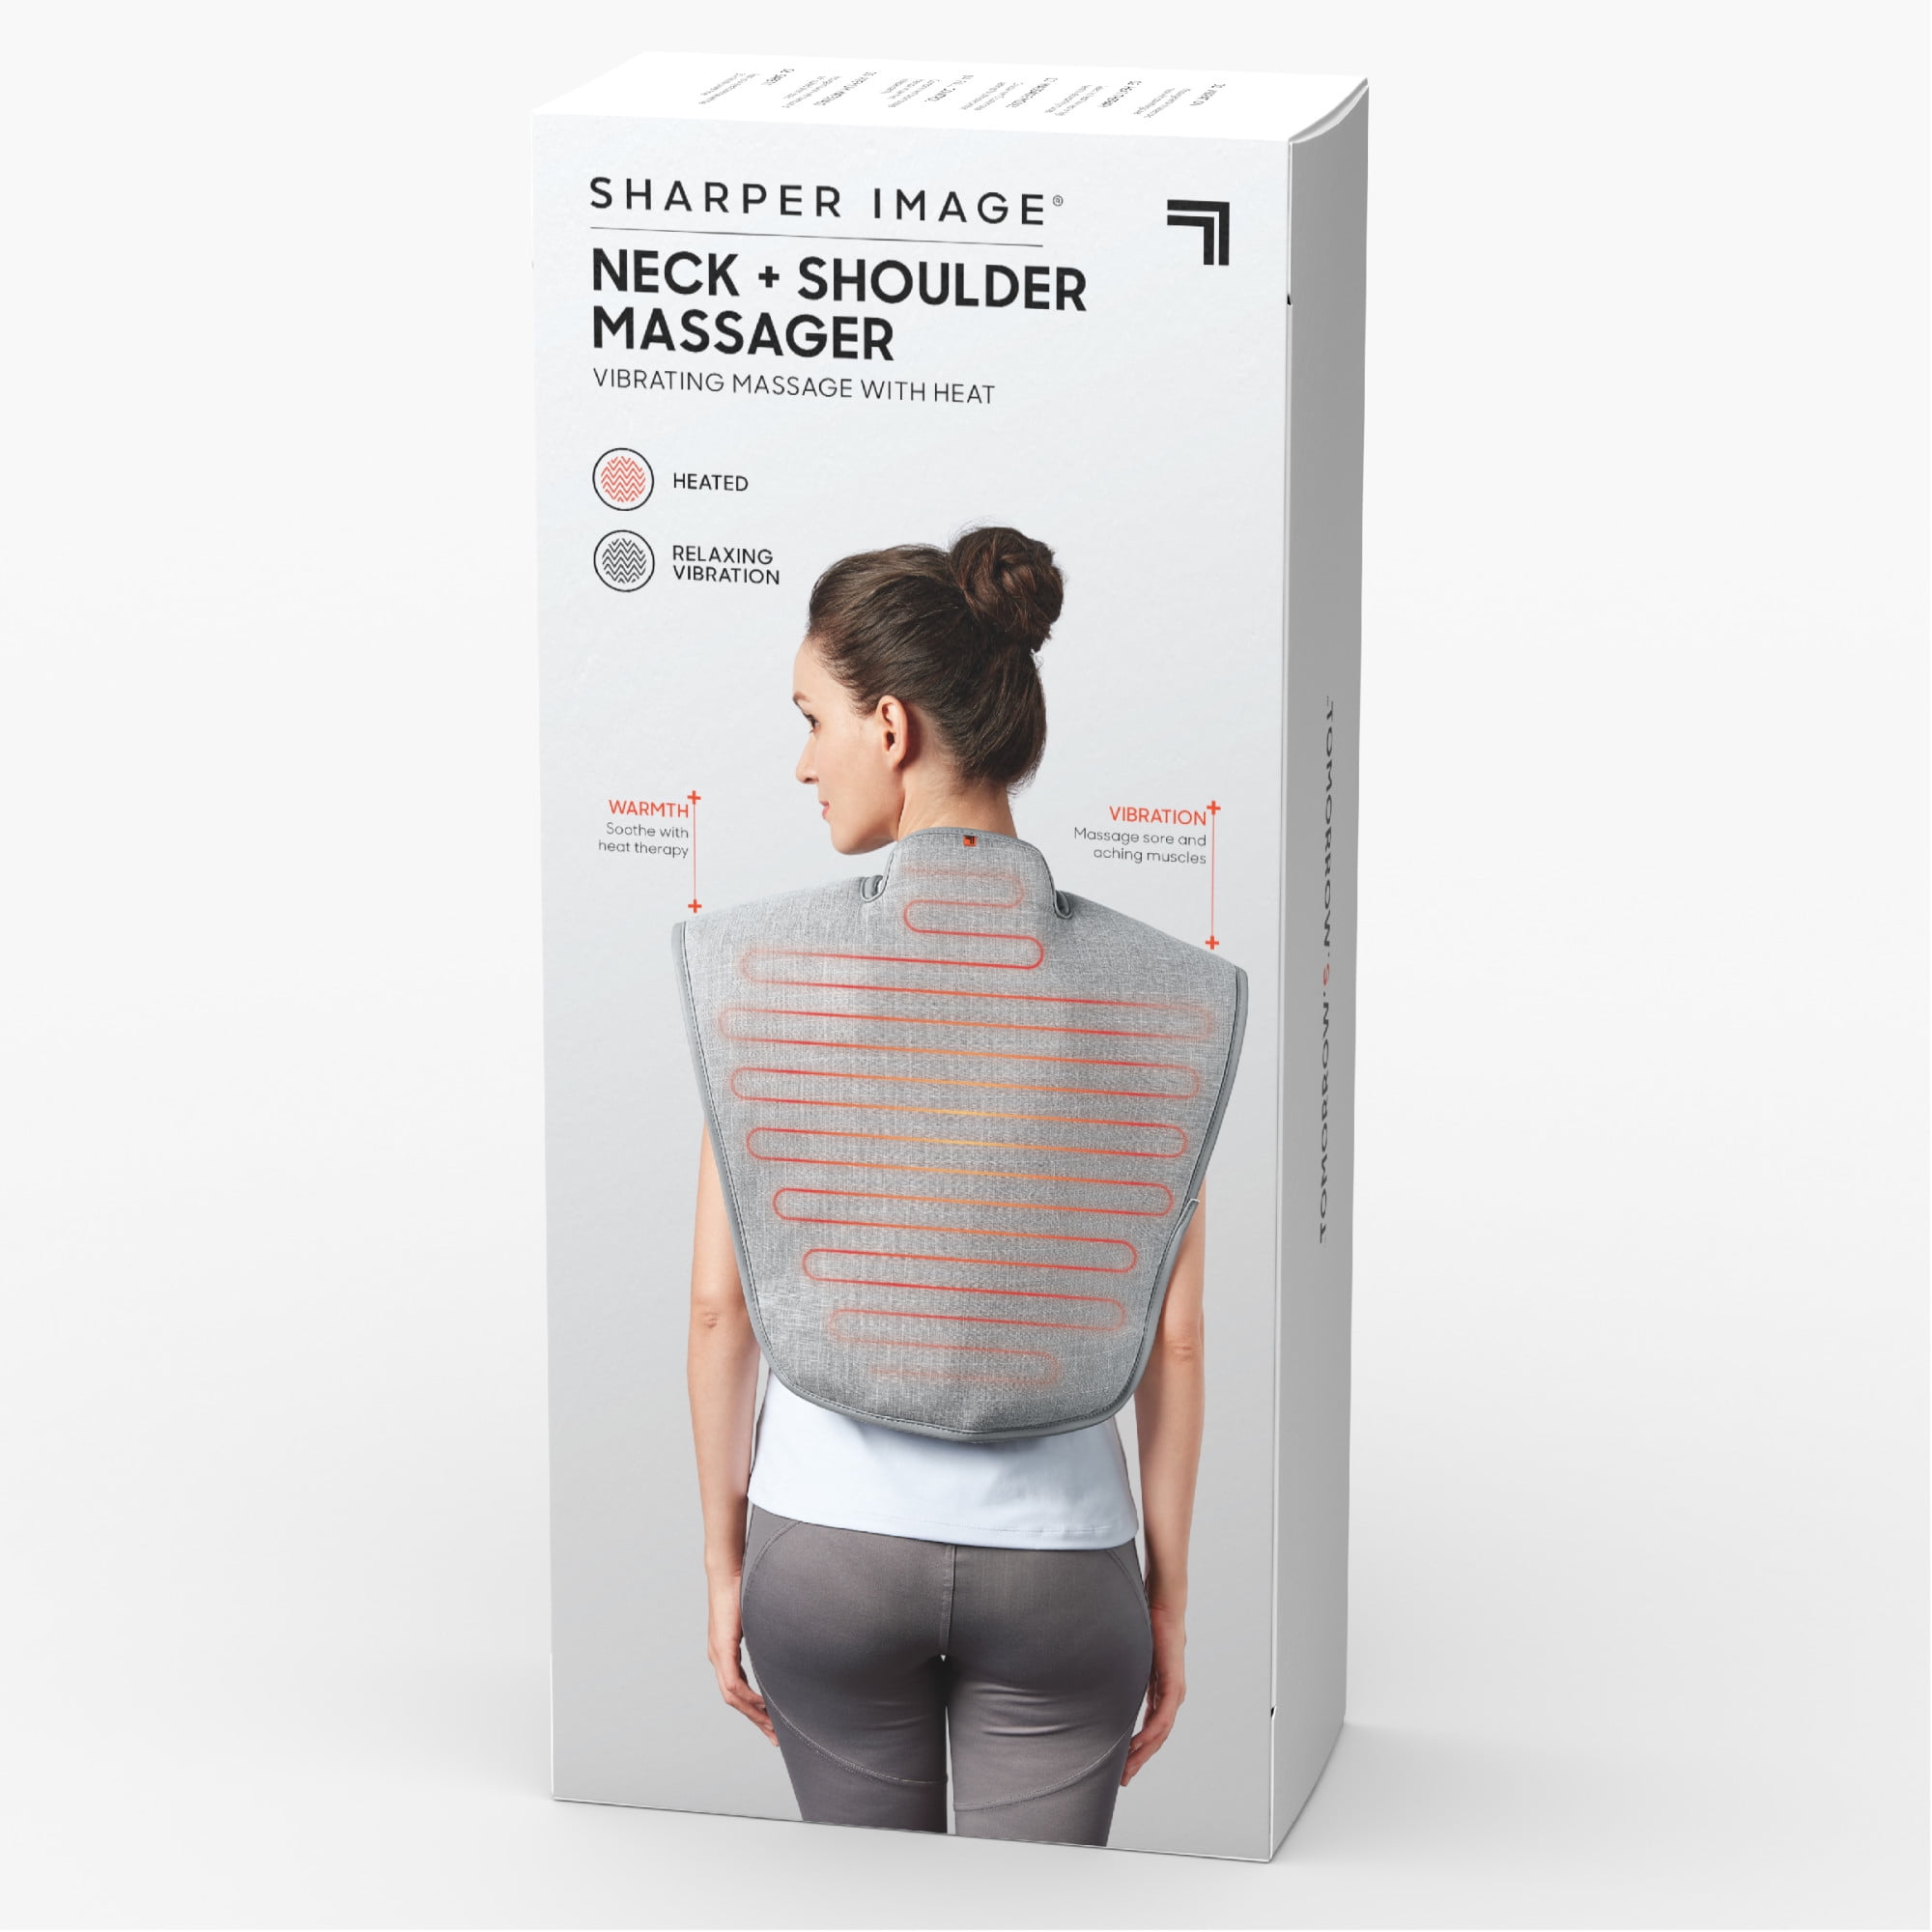 Sharper Image Heated Neck and Shoulder Massager for Pain Relief